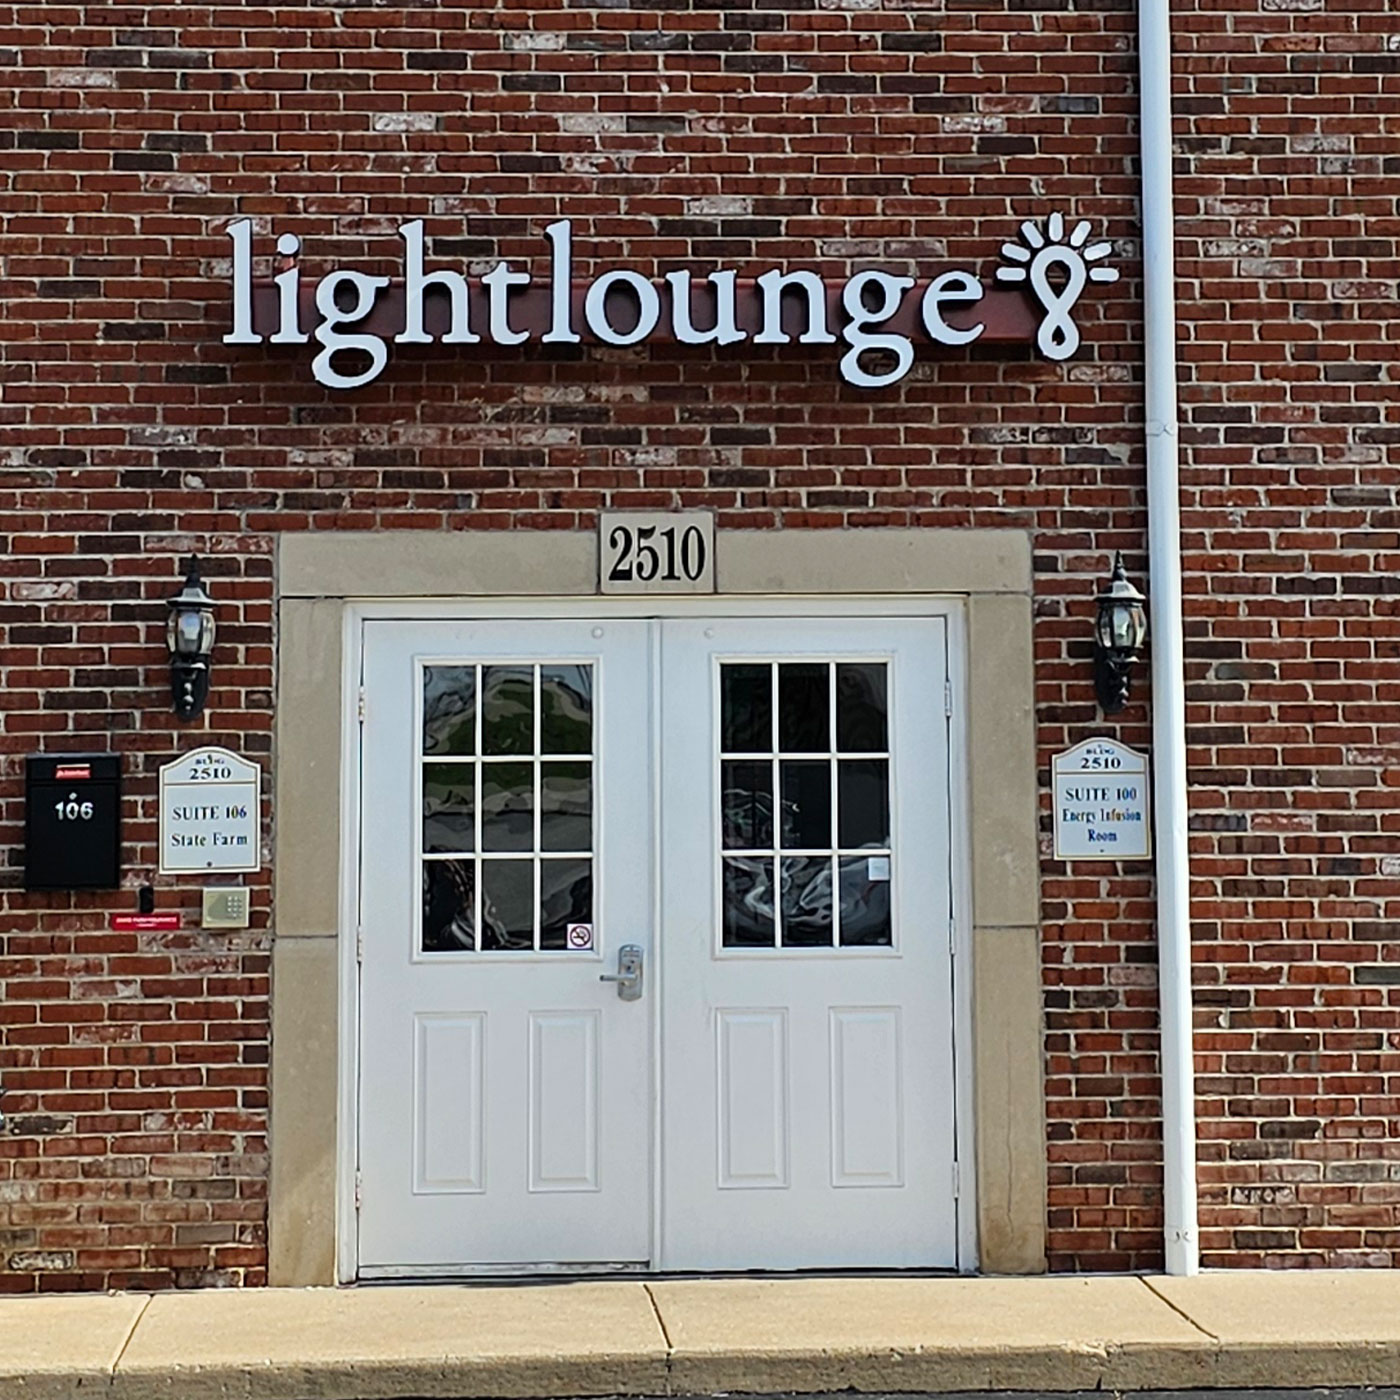 Light Lounge St. Charles, MO Store Front